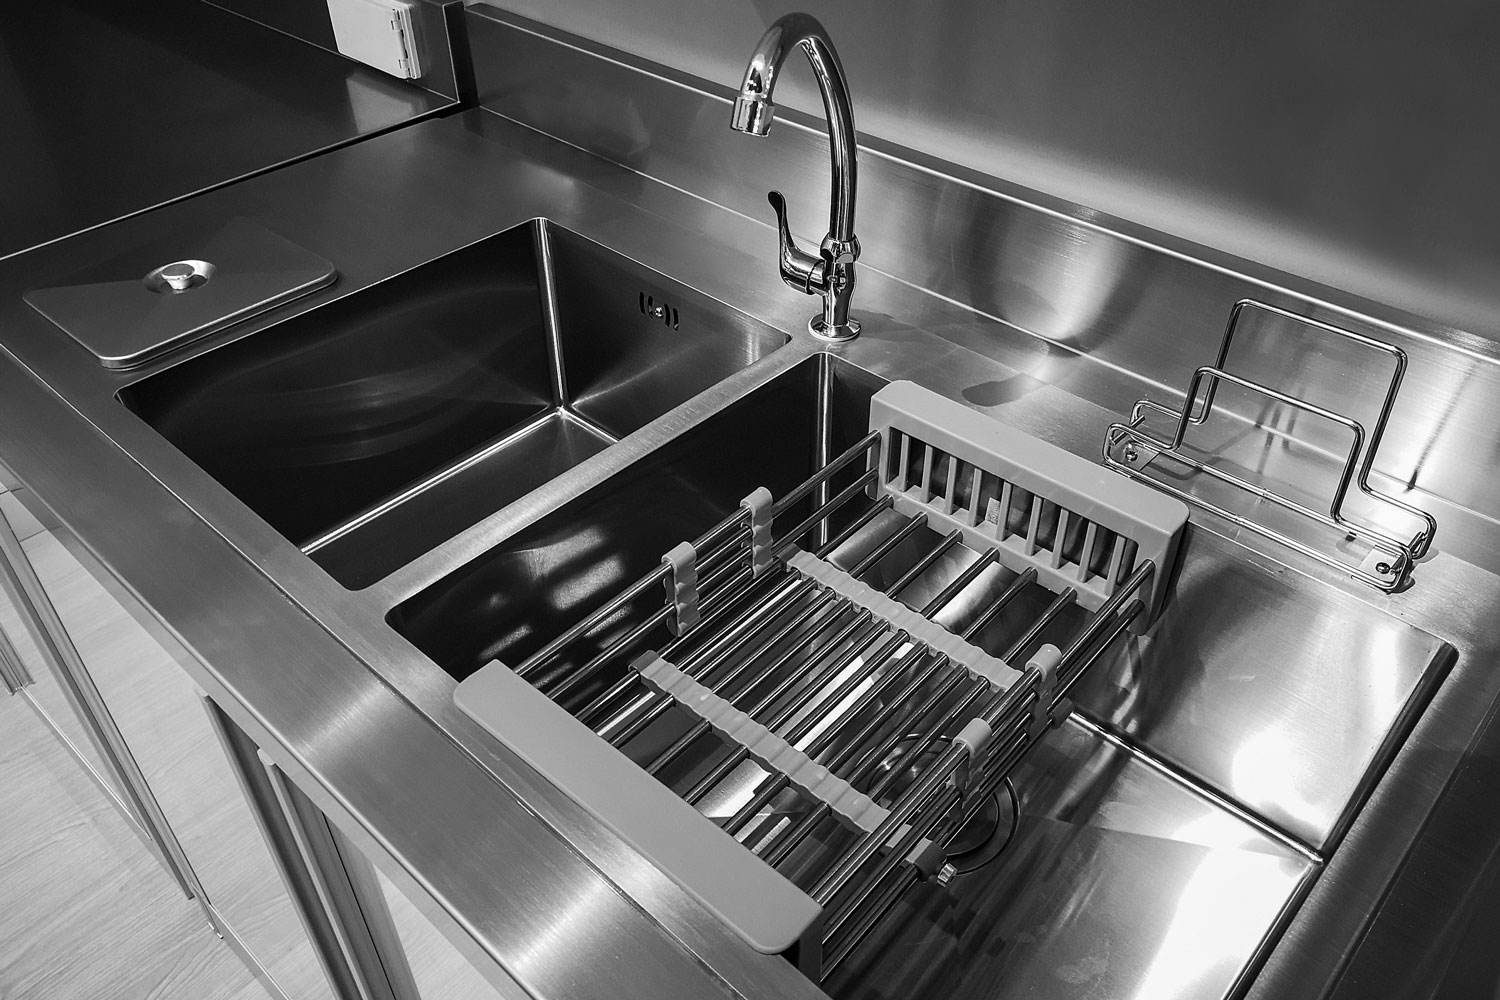 A stainless steel double sink in the kitchen